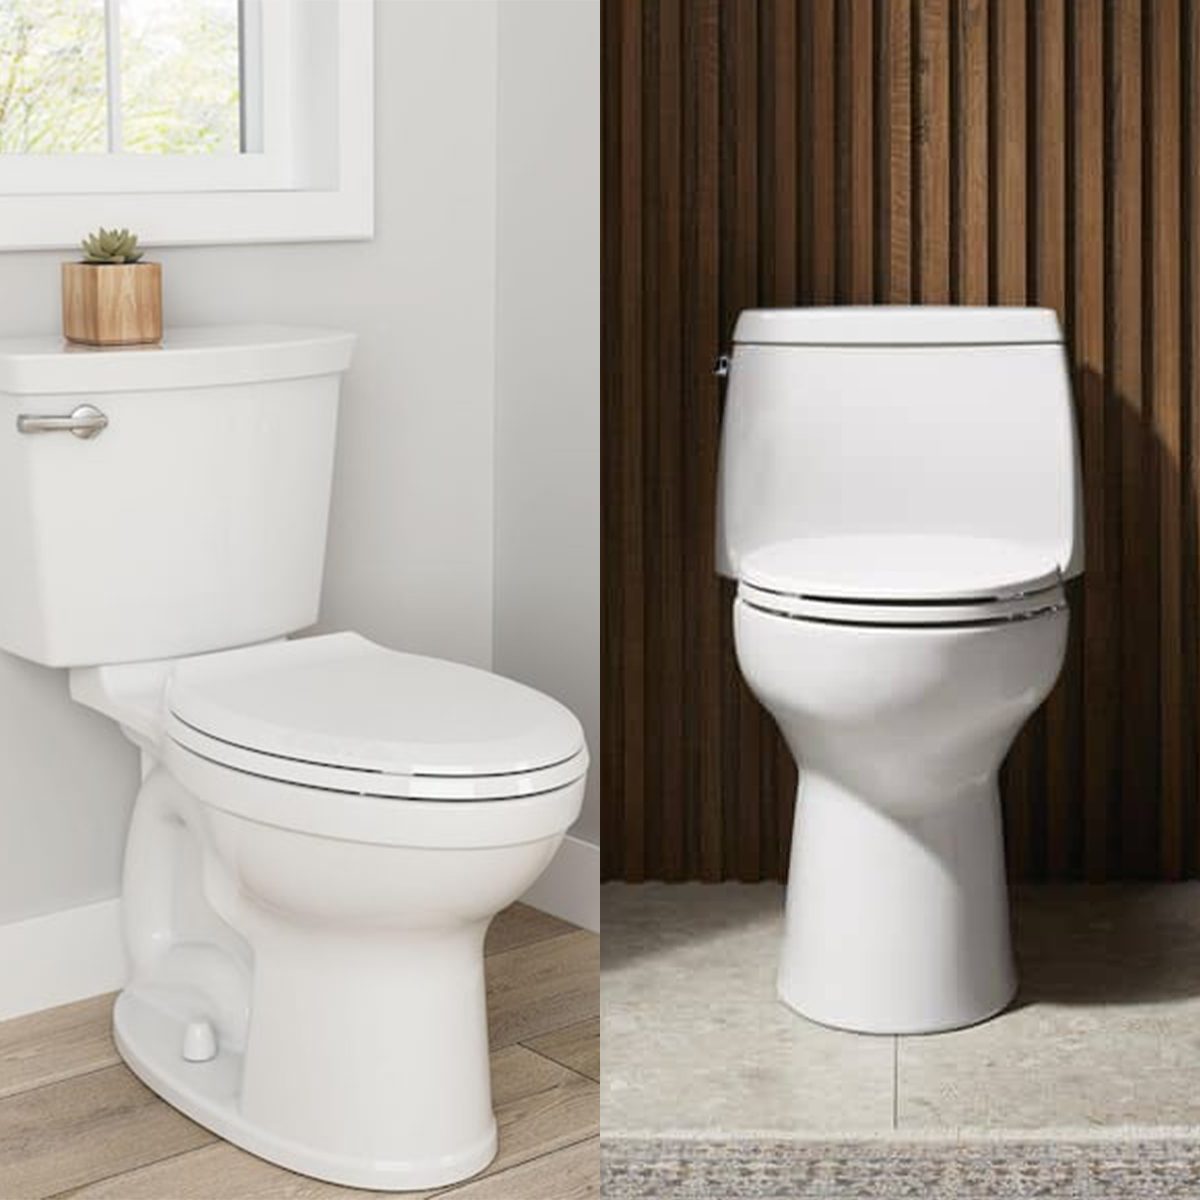 This Just Might Be the Best Budget-Friendly Toilet for a Small